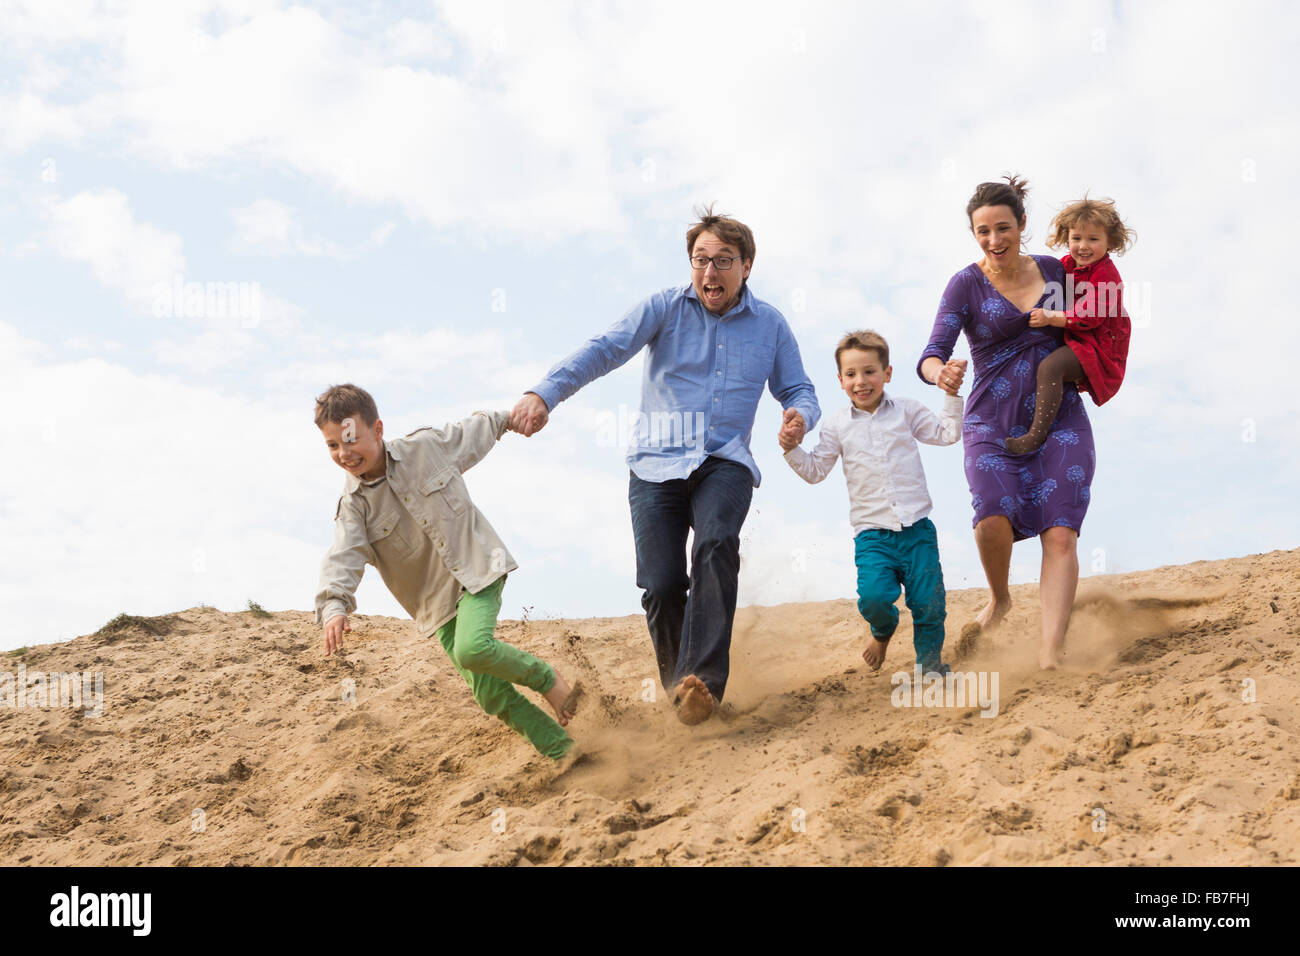 Cheerful family holding hands while running on sand dune against sky Stock Photo